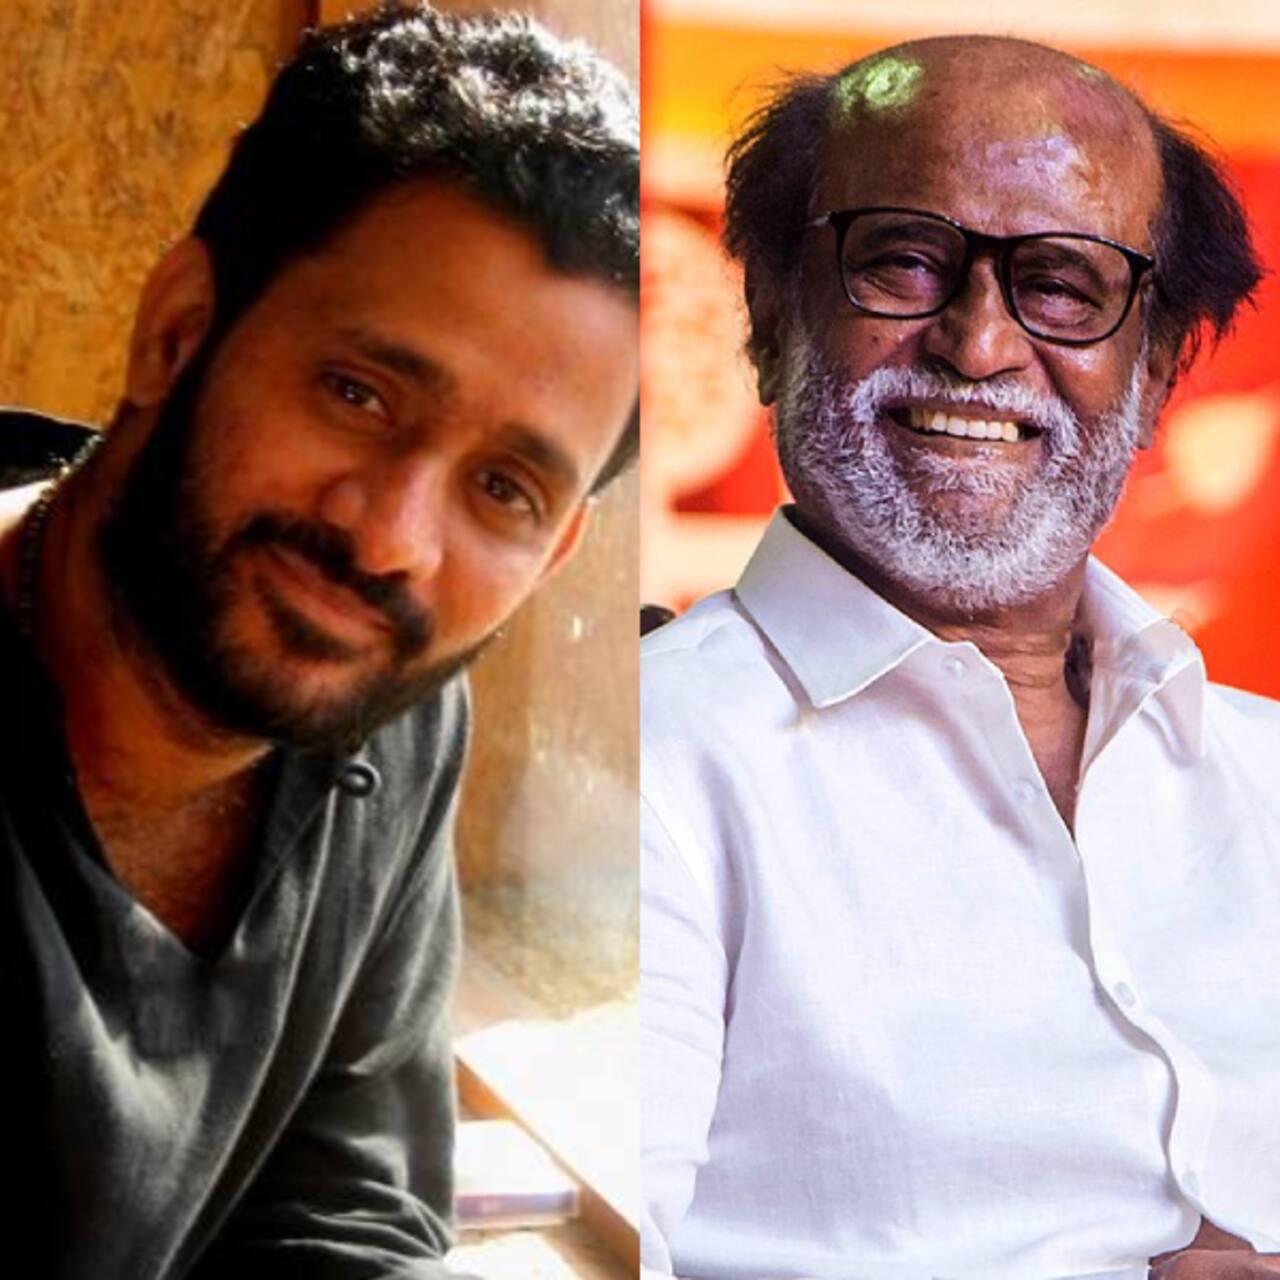 Trending South News Today: Resul Pookutty takes a dig at SS Rajamouli's RRR, Rajinikanth lauds R Madhavan's Rocketry: The Nambi Effect and more